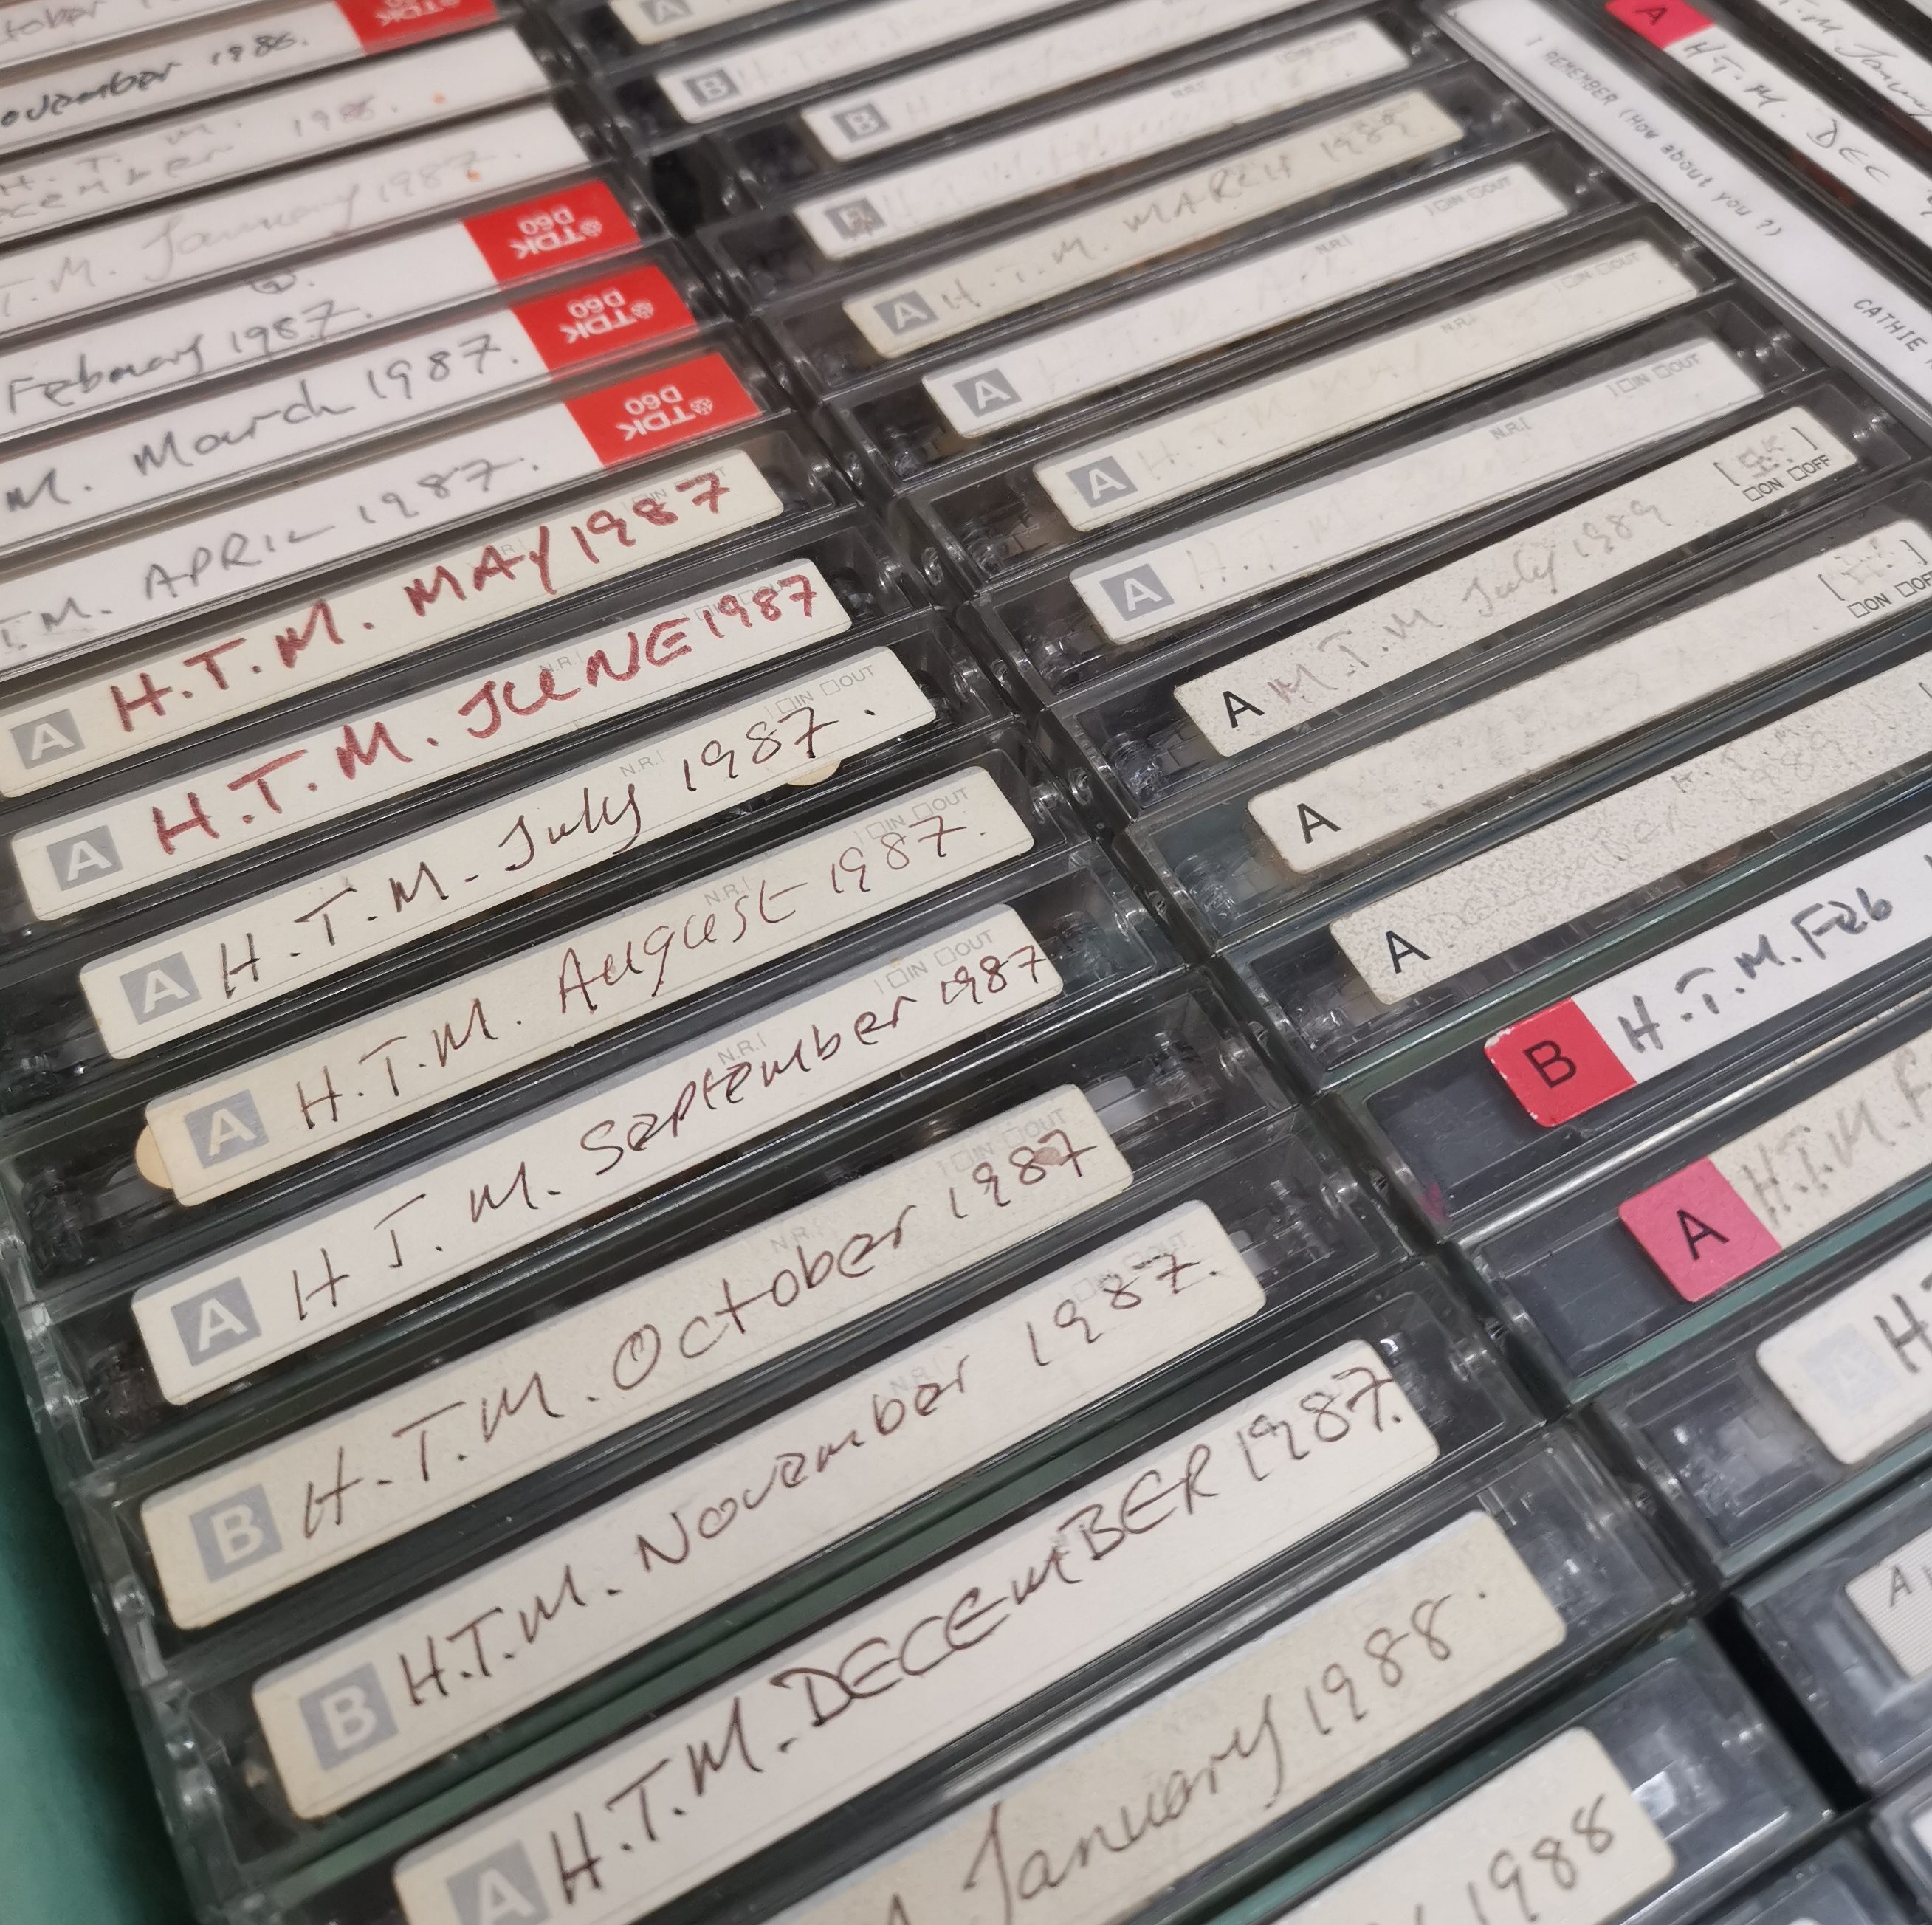 Three rows of cassettes in a green box. Handwritten labels on the cassettes read 'HTM' and the month and year they were created.